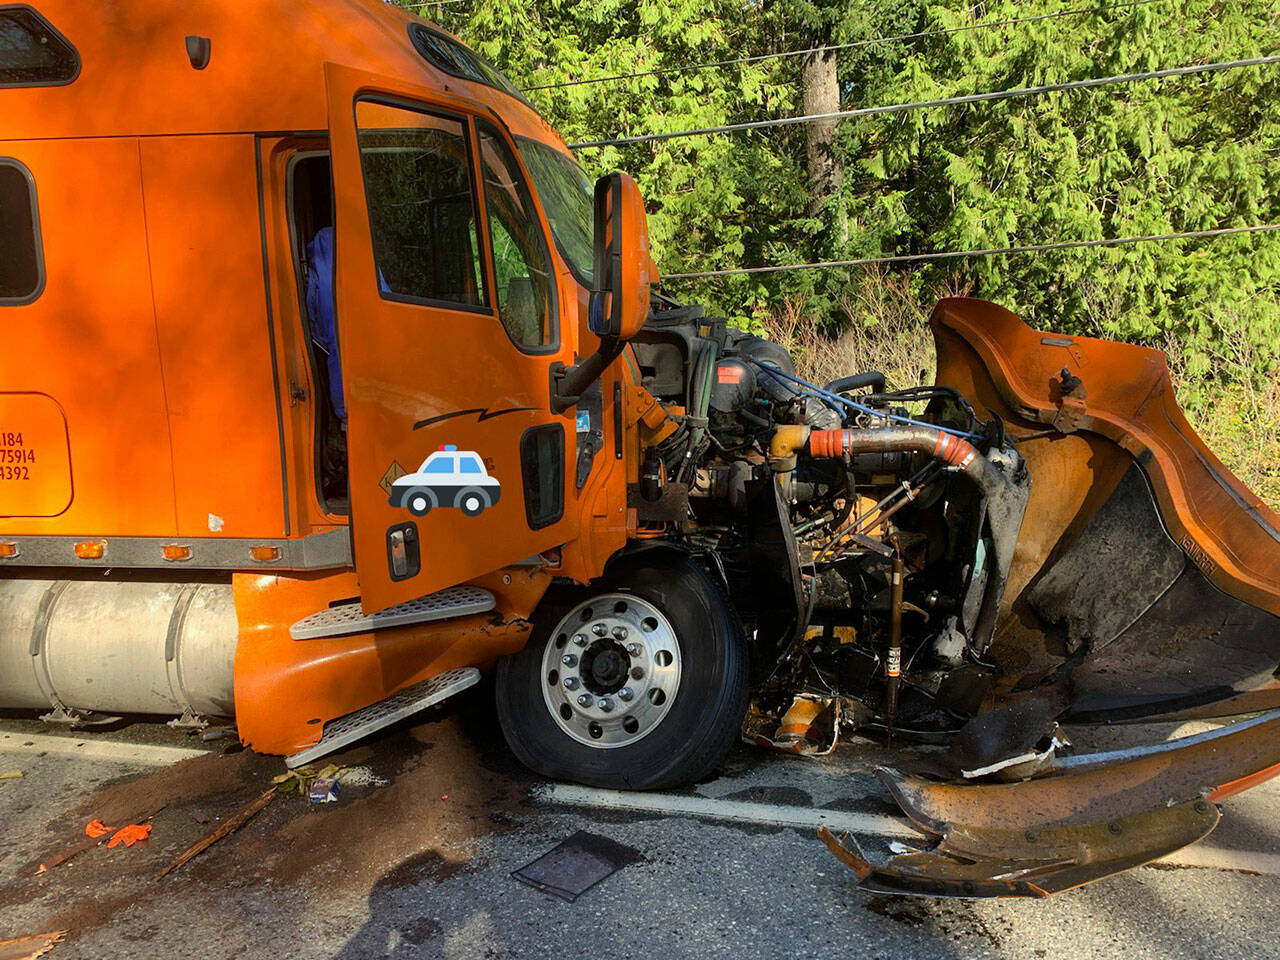 A semi truck head-on crashed with a passenger vehicle on U.S. 2 on Saturday morning. (Washington State Patrol)